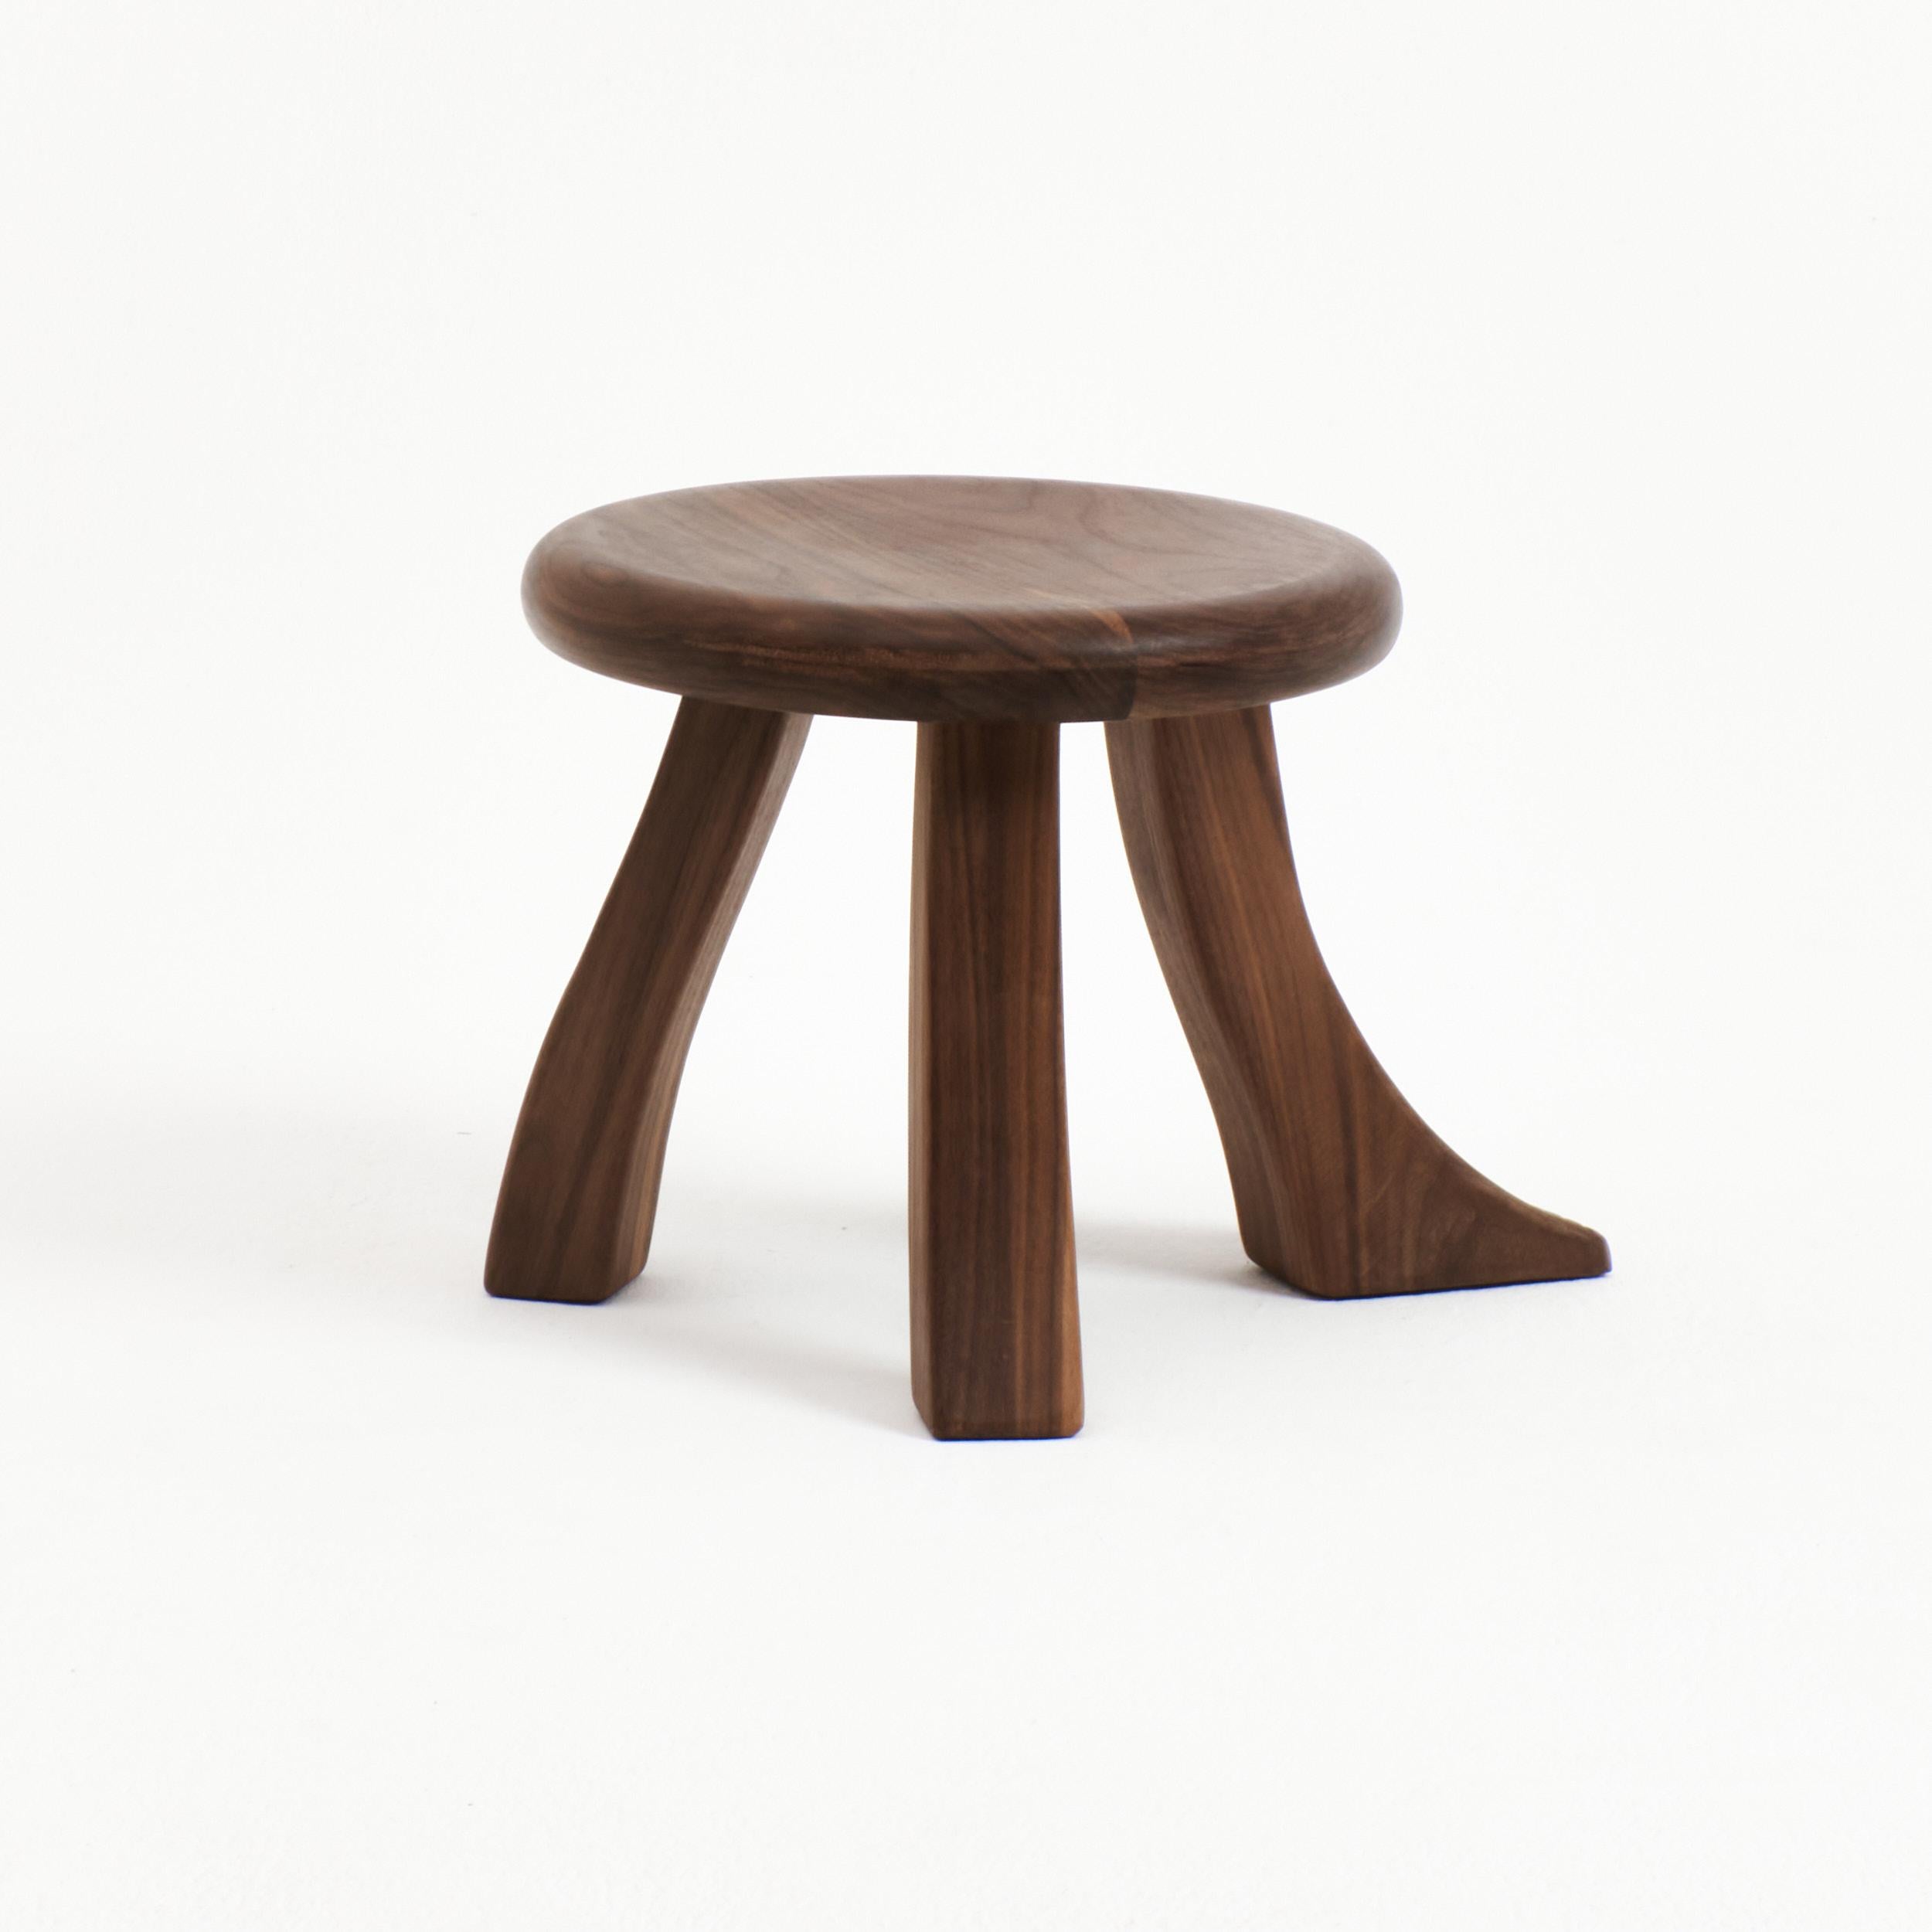 Portuguese Foot Stool in walnut For Sale